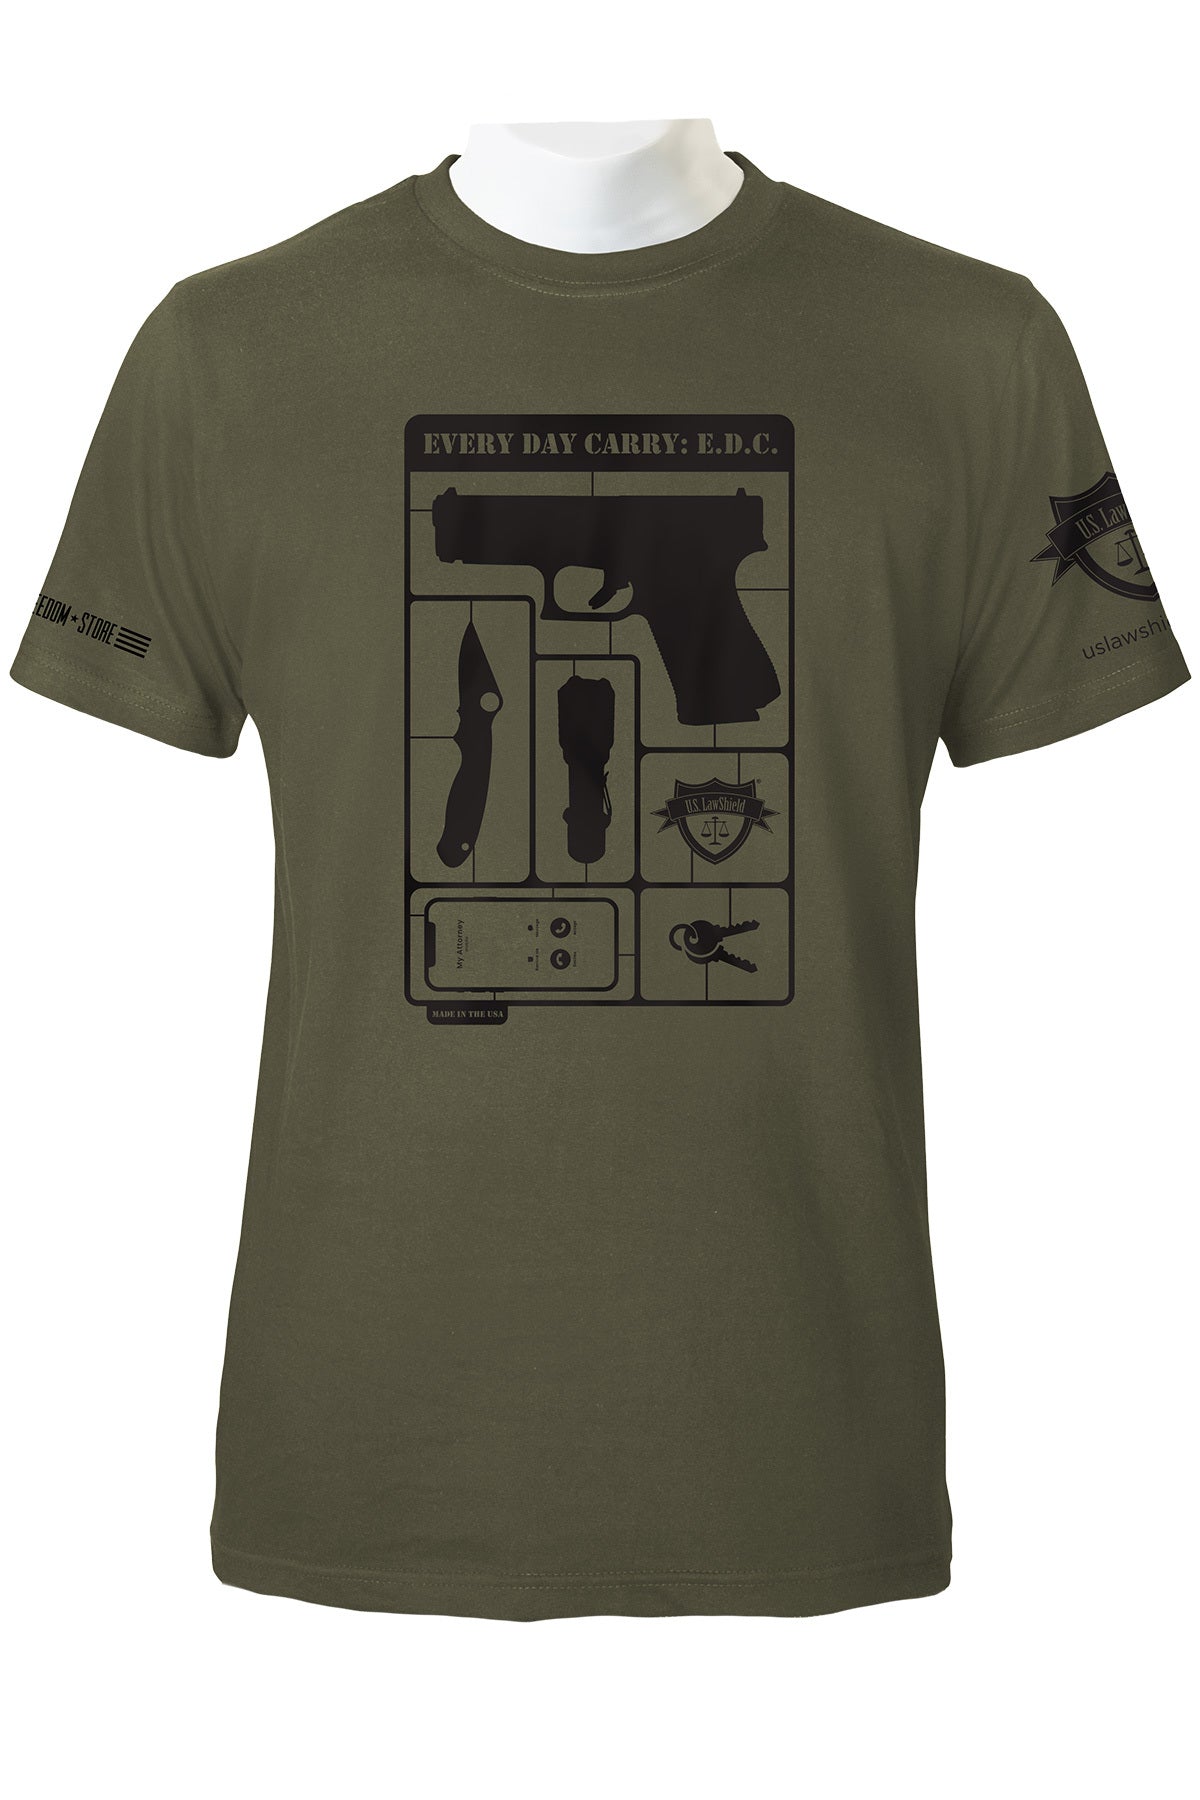 Every Day Carry Amendment T-Shirt – Store